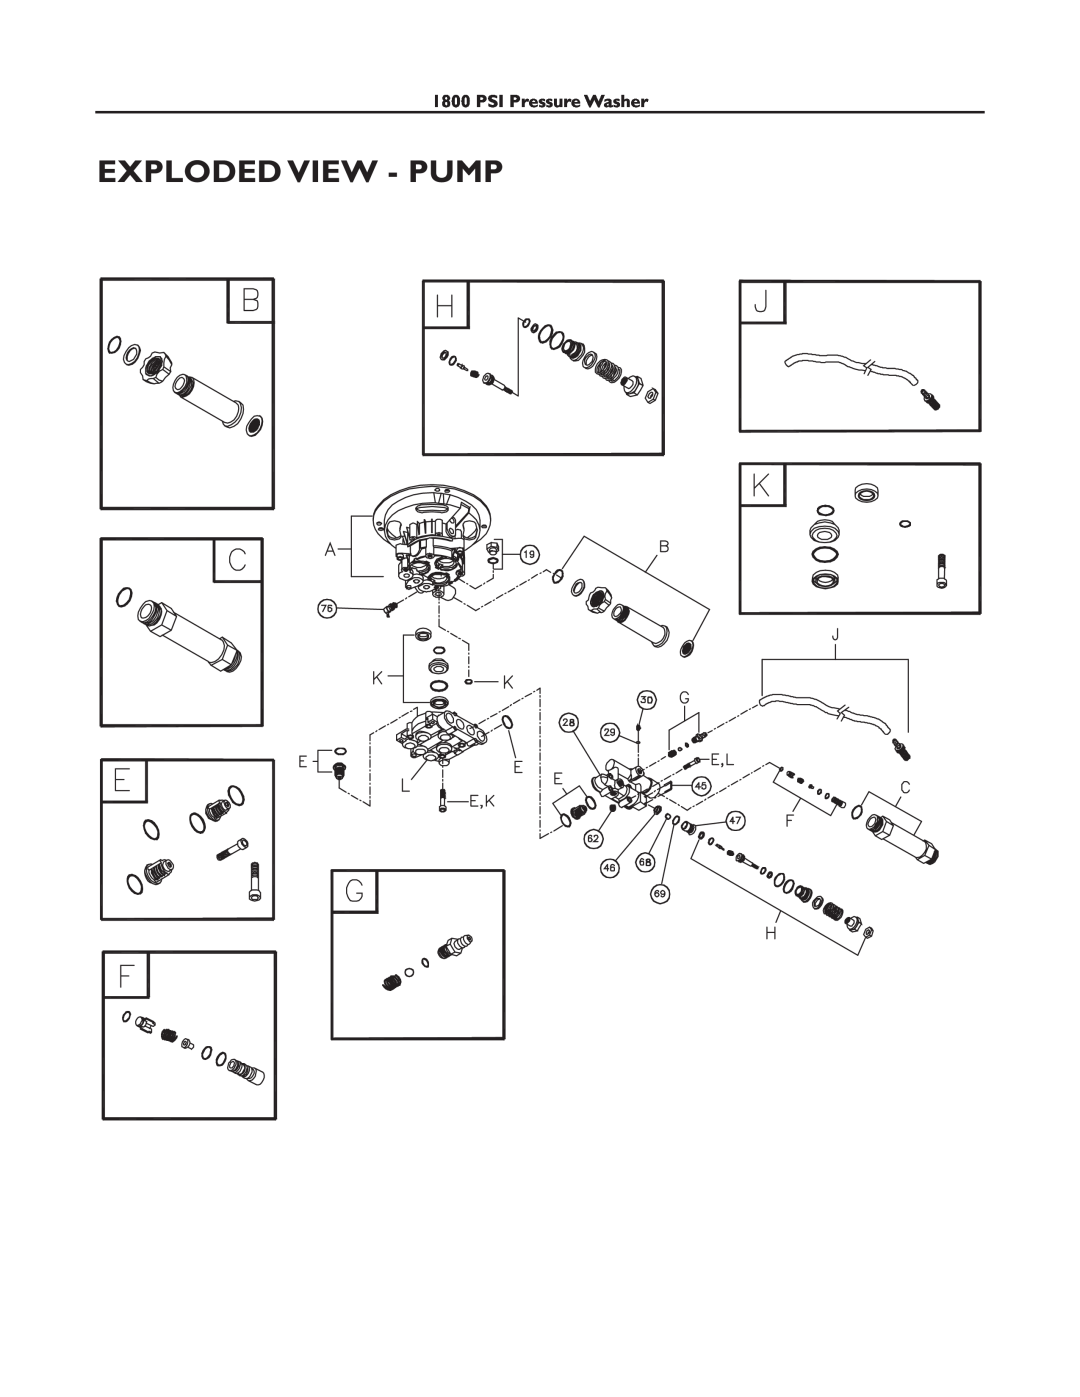 Briggs & Stratton 01811-0 manual Exploded View - Pump, PSI Pressure Washer 